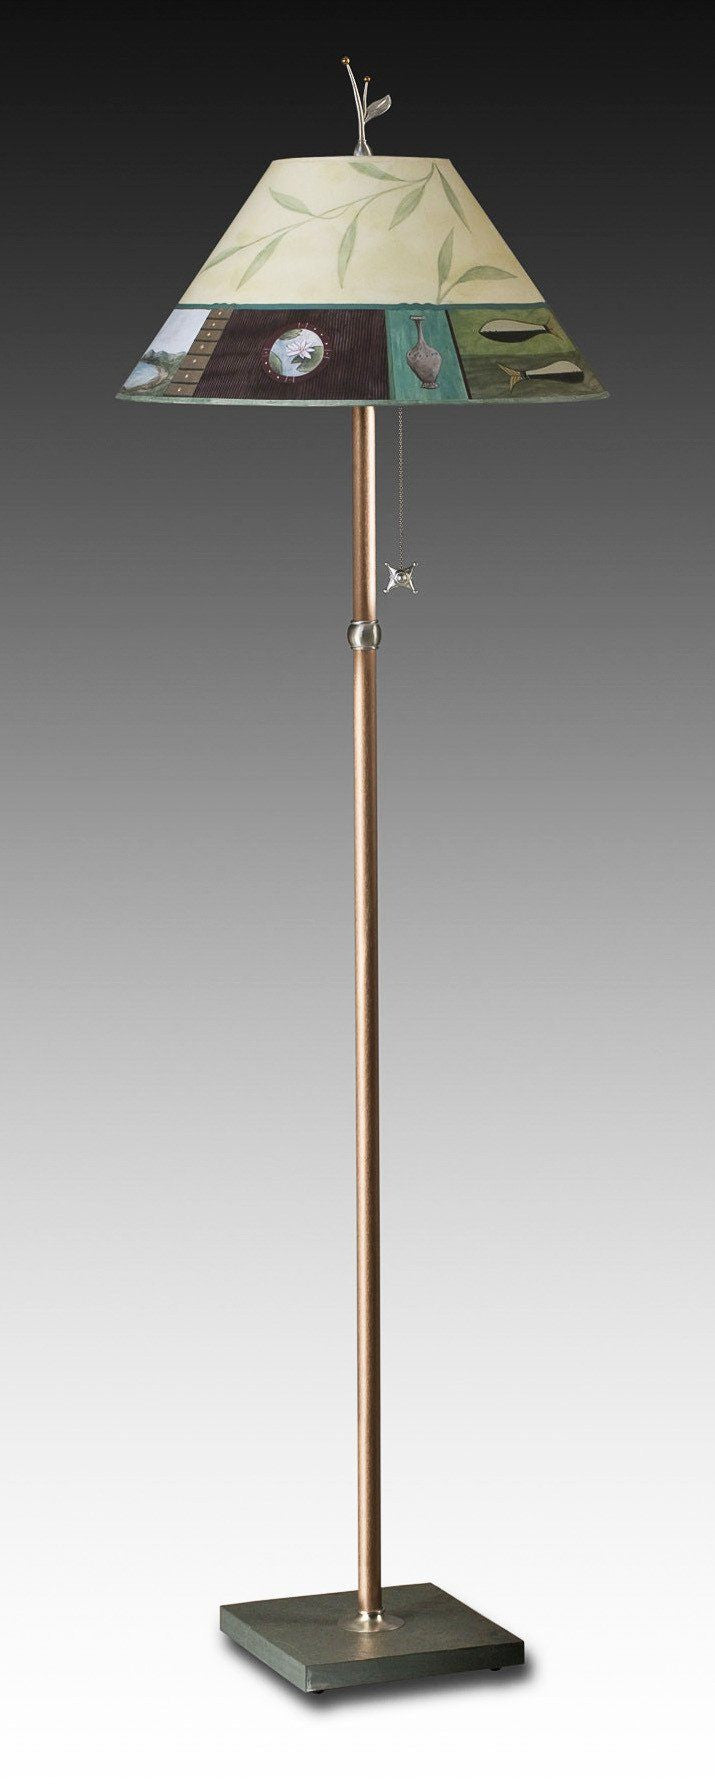 Copper Floor Lamp on Vermont Slate Base with Large Conical Shade in Twin Fish